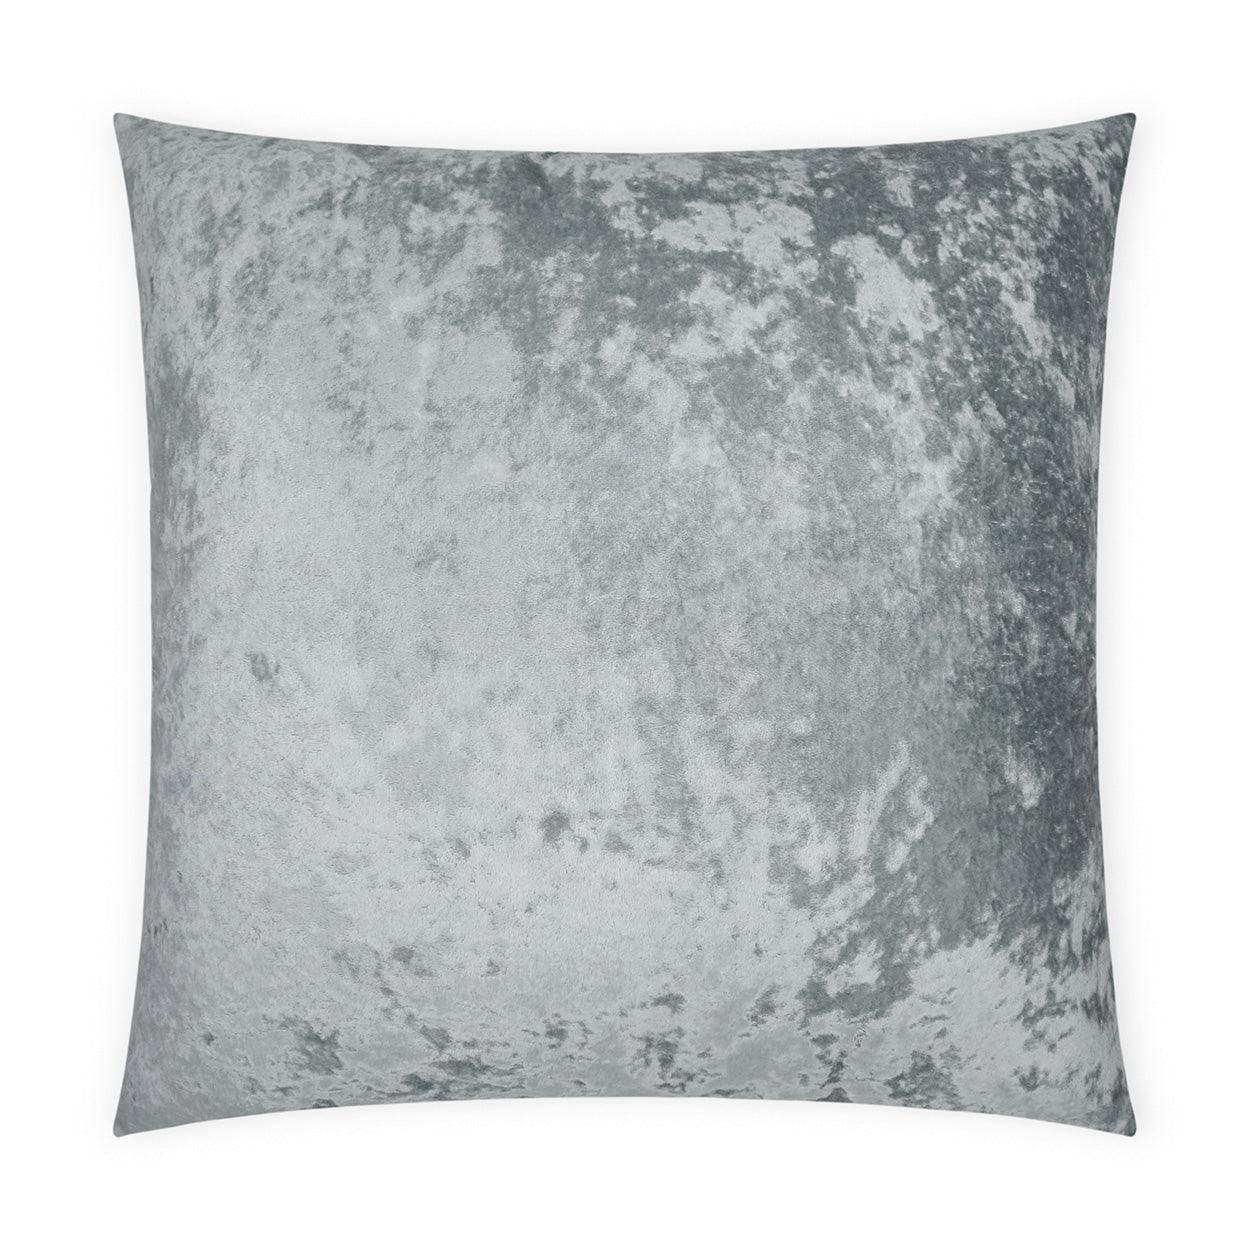 Ballet Silver Solid Silver Mist Large Throw Pillow With Insert - Uptown Sebastian